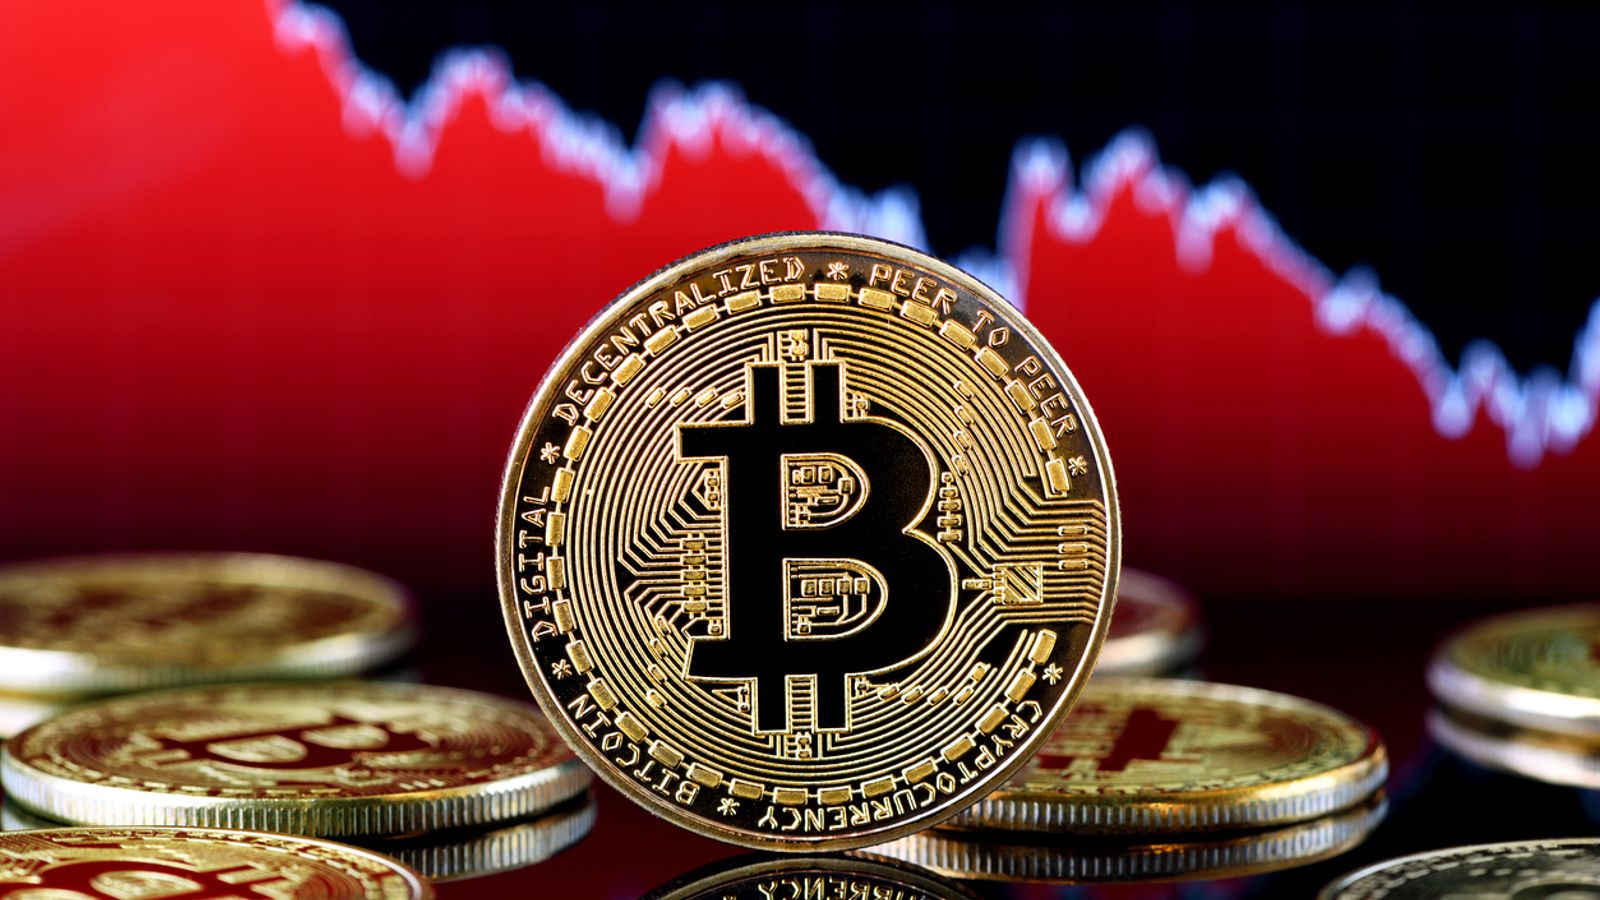 Why Bitcoin has suffered a sharp pullback from record highs - and what might happen next